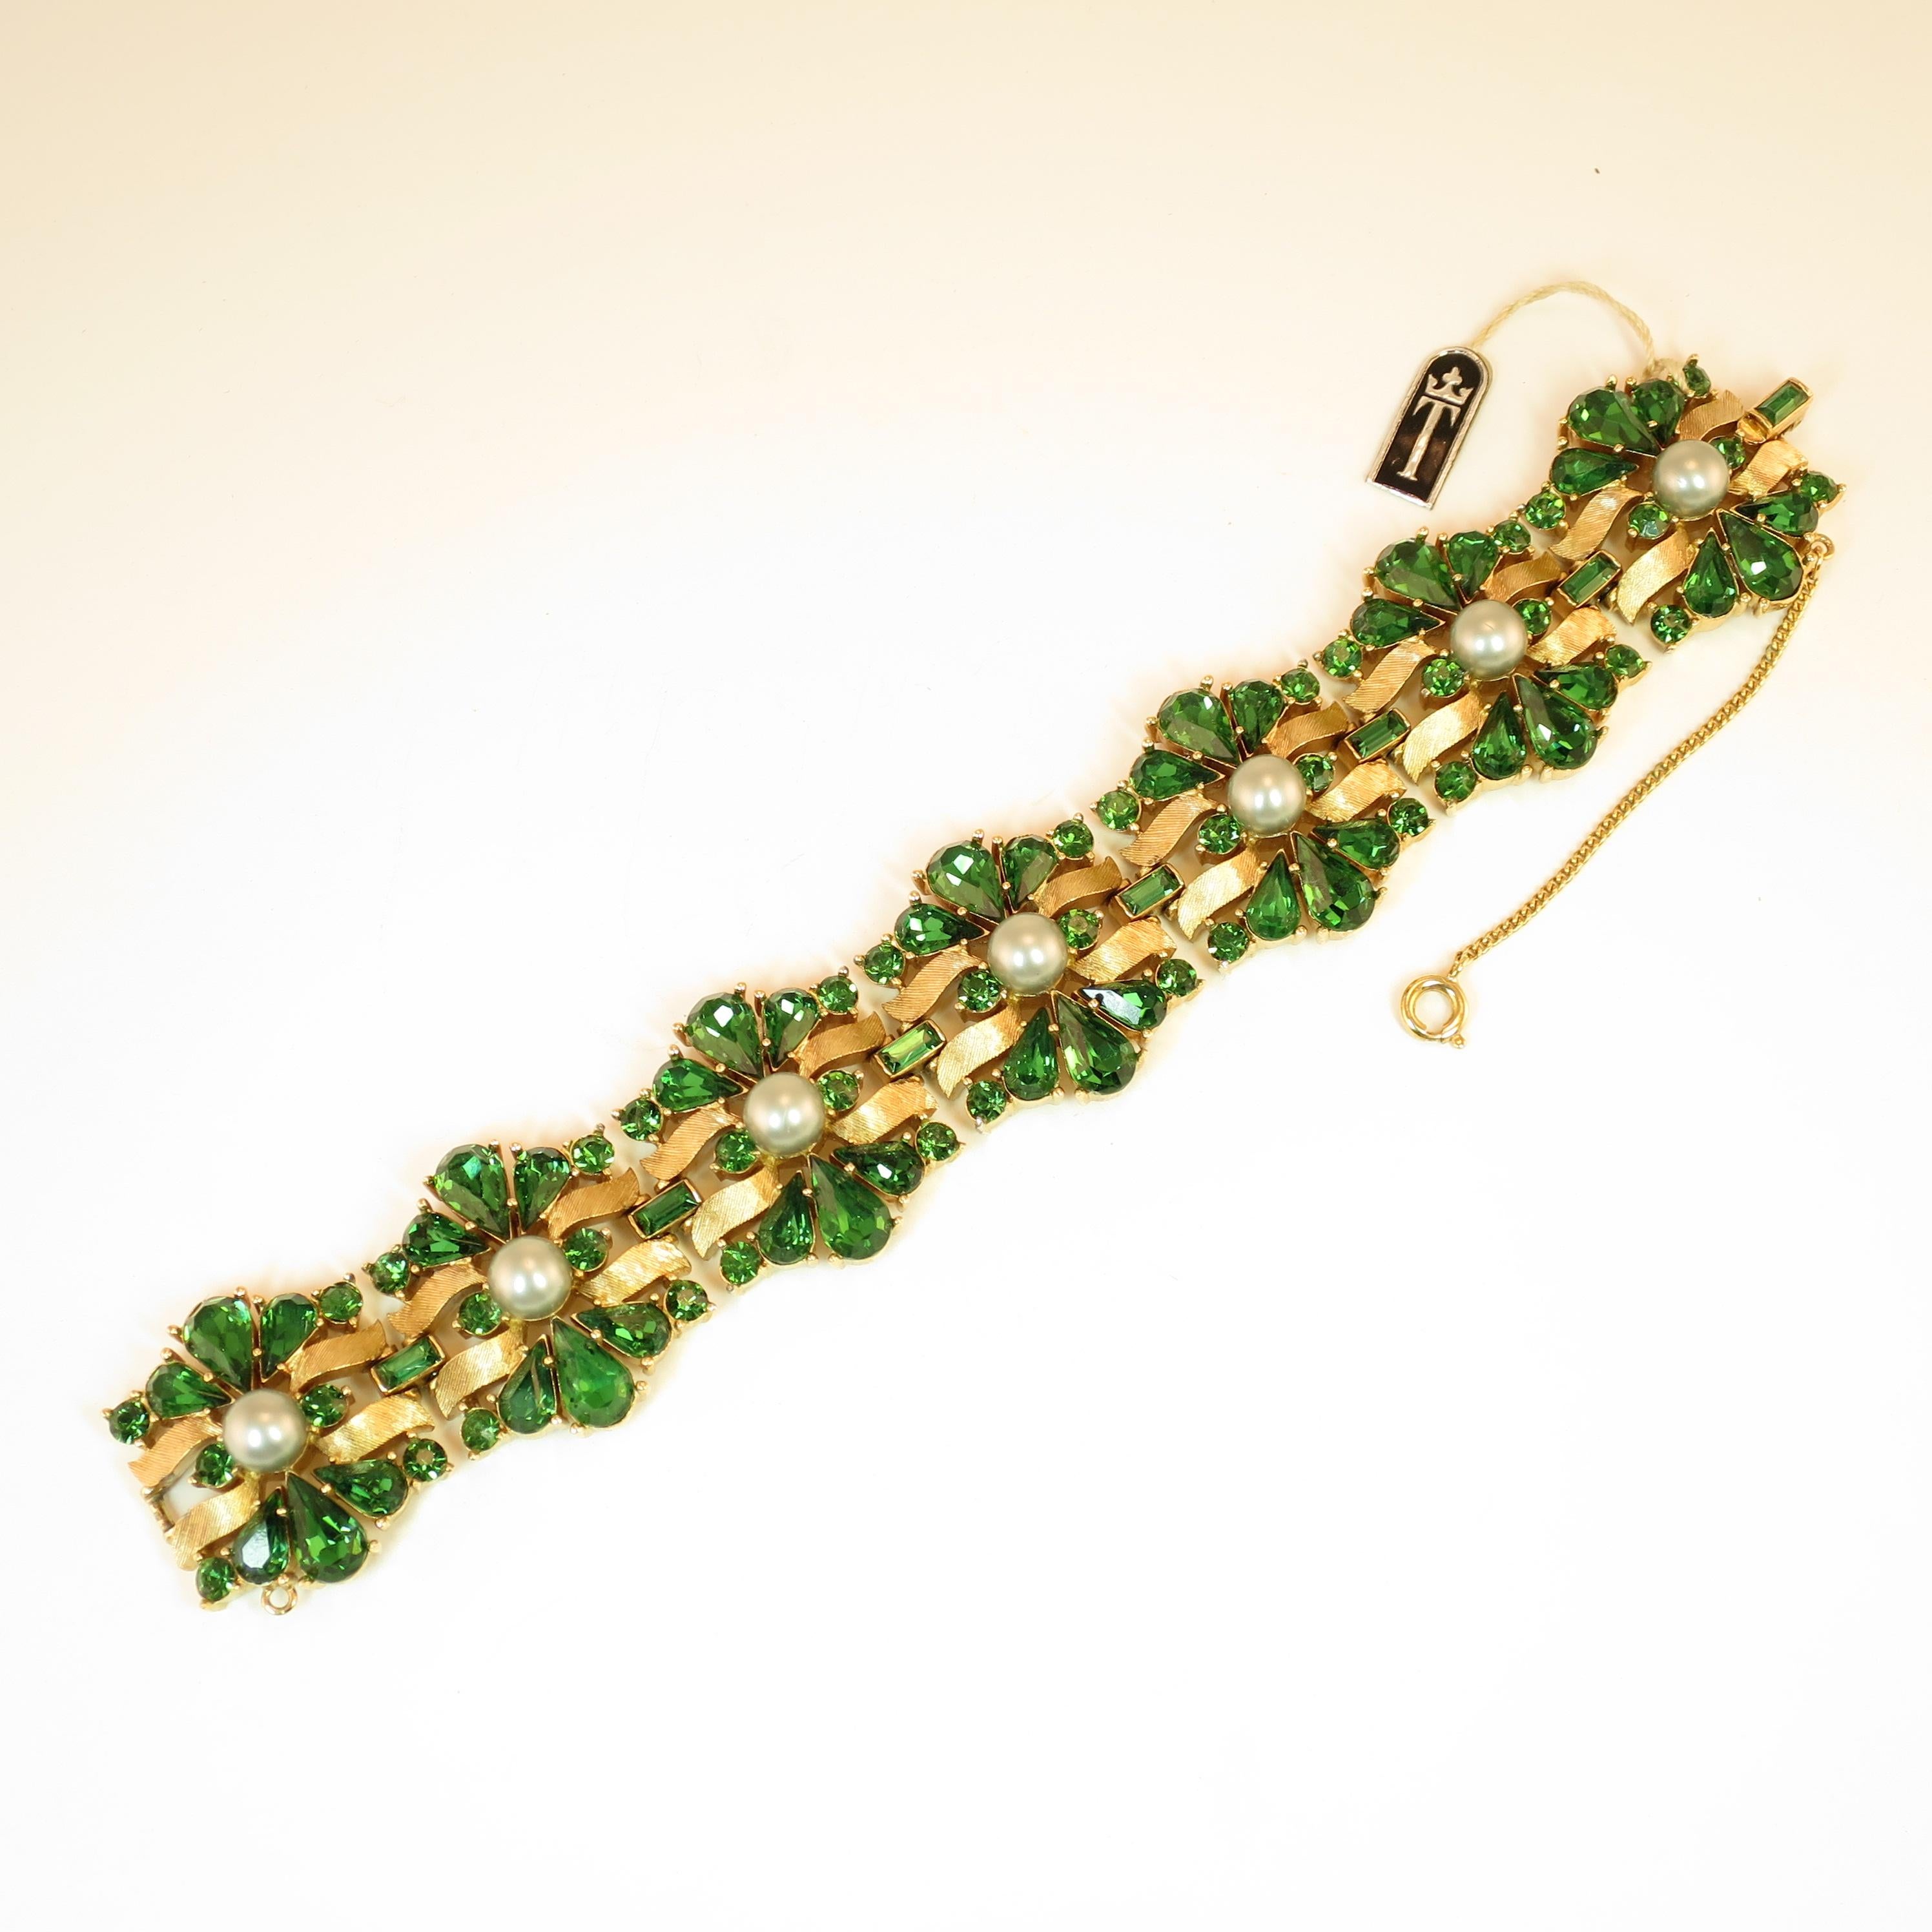 Offered here is a Crown Trifari Alfred Philippe-designed heavily-gilded rhodium bracelet embellished with emerald Swarovski crystals and silver glass pearls from the 1950s. The heavy link design presents slightly domed stations in a flowing